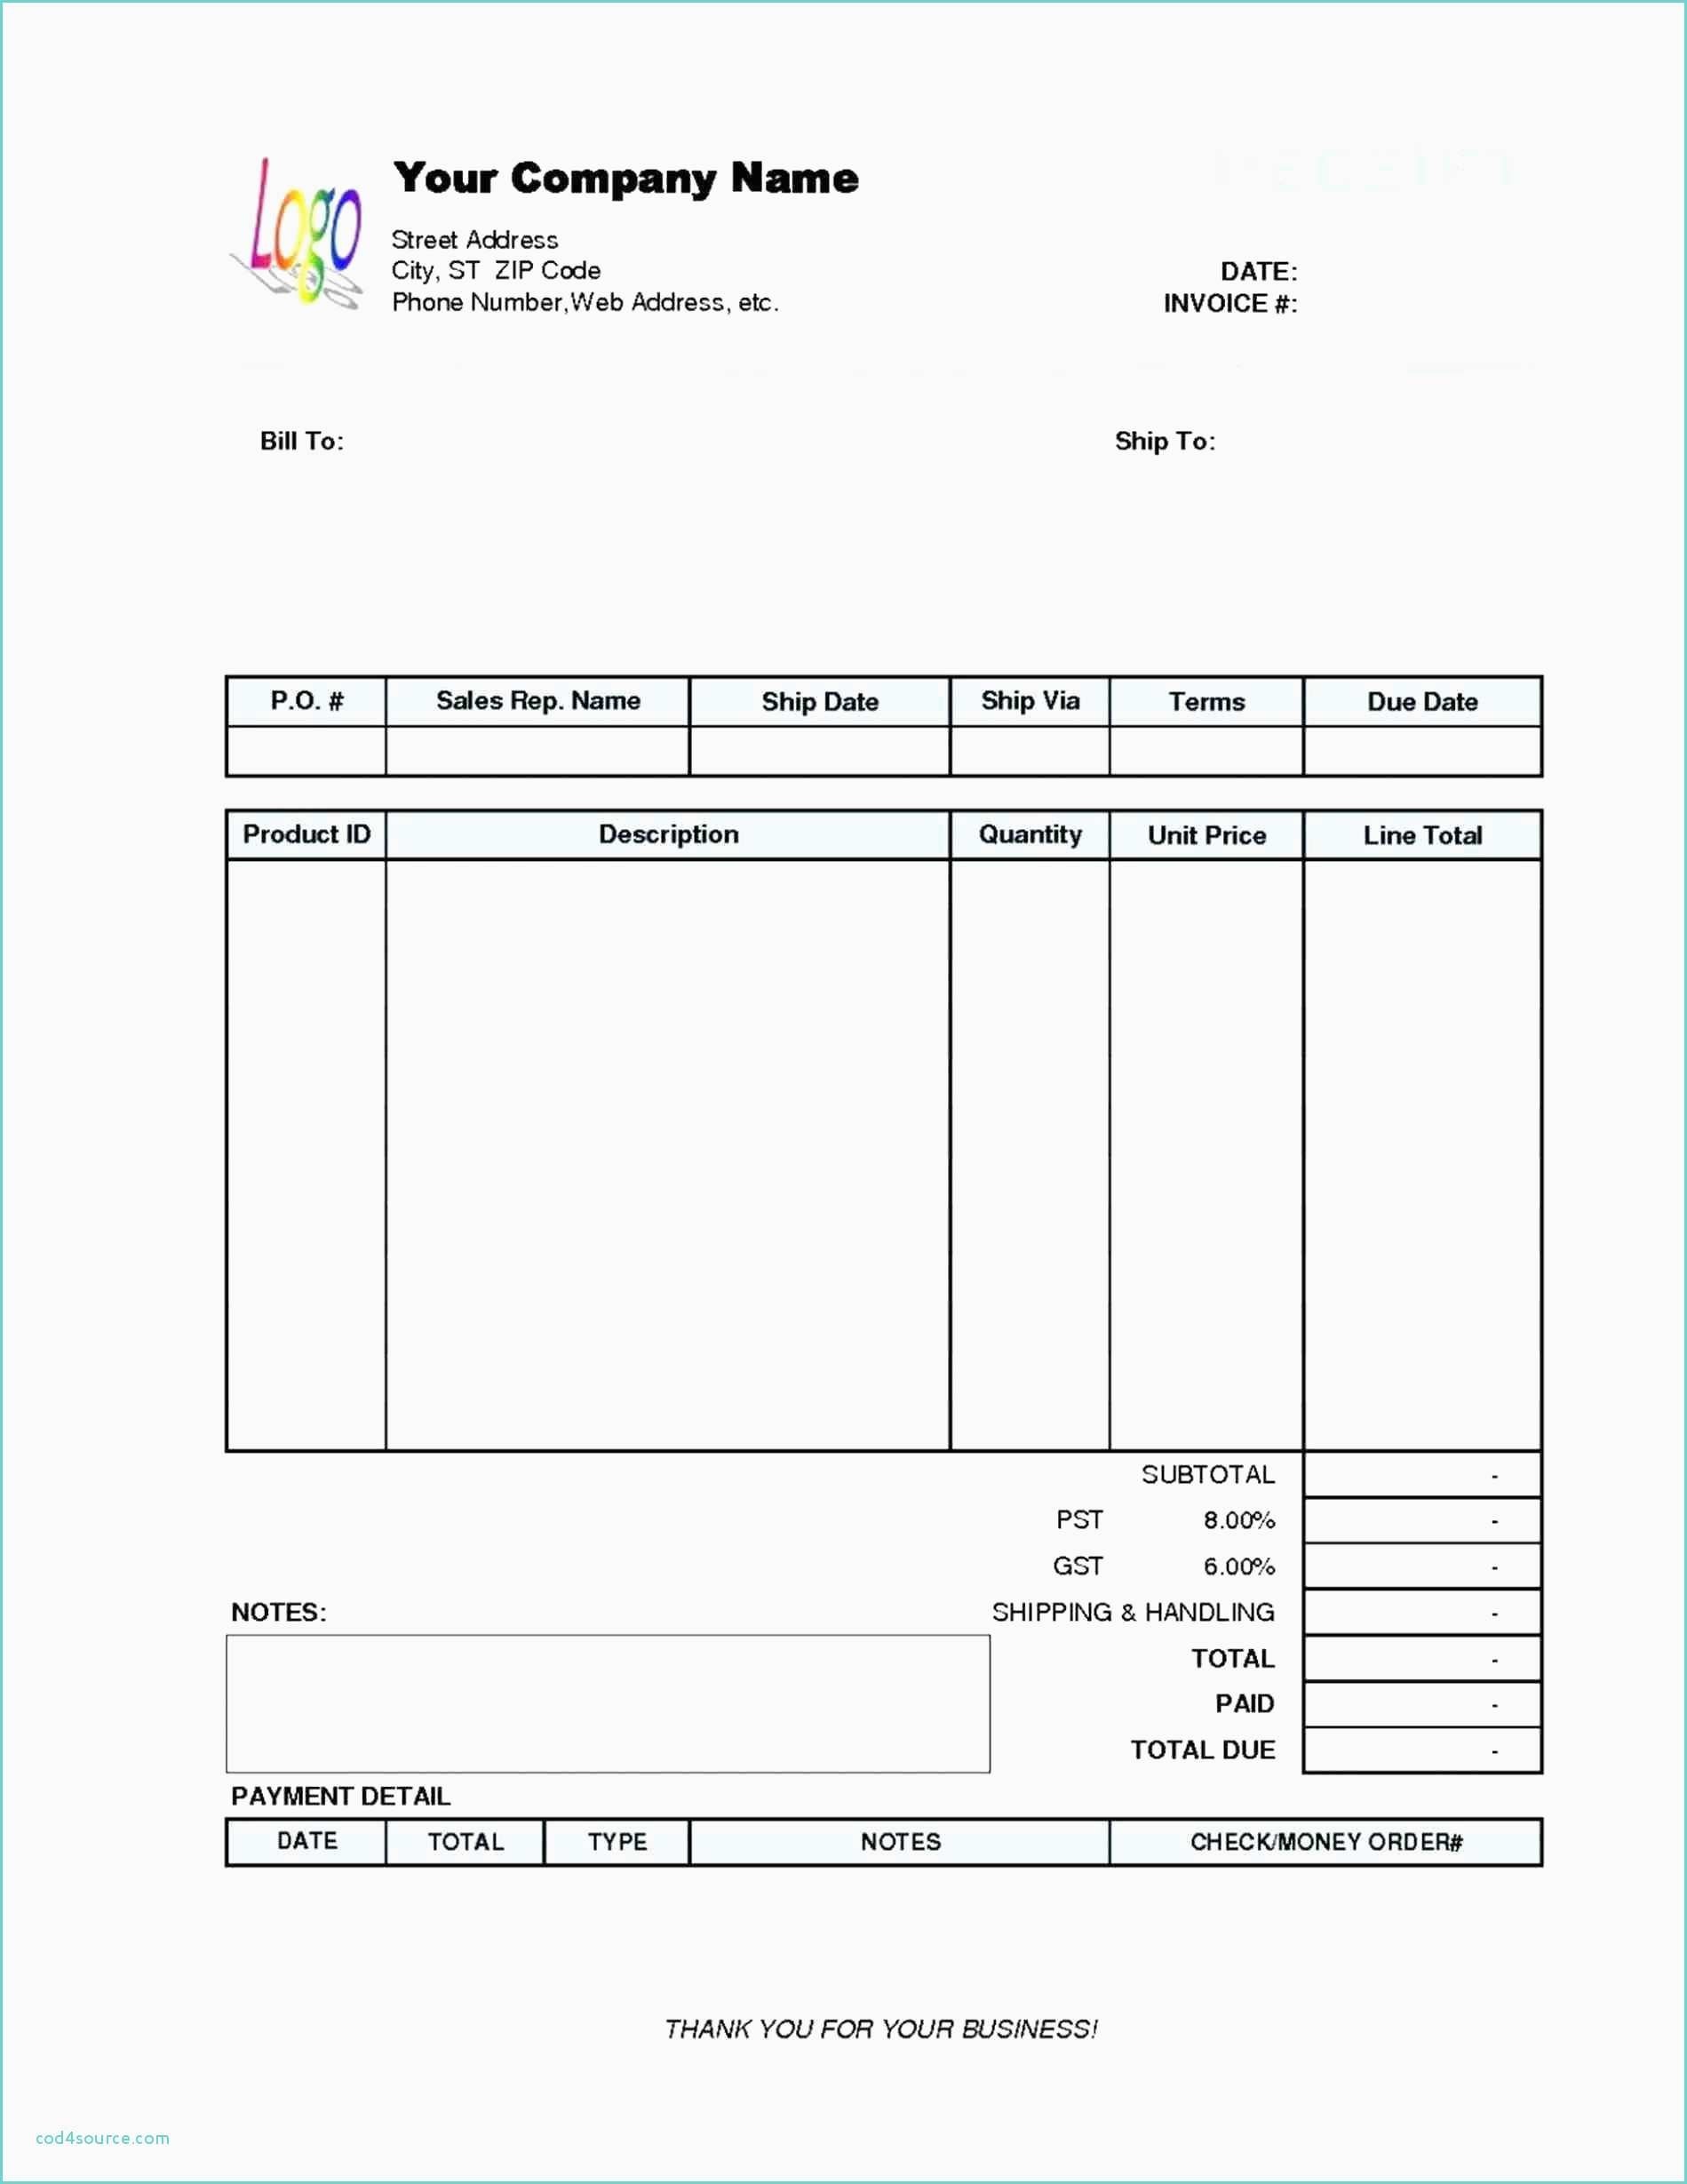 Free Printable Contractor Invoice Best Of Free Printable Checks - Free Printable Checks Template